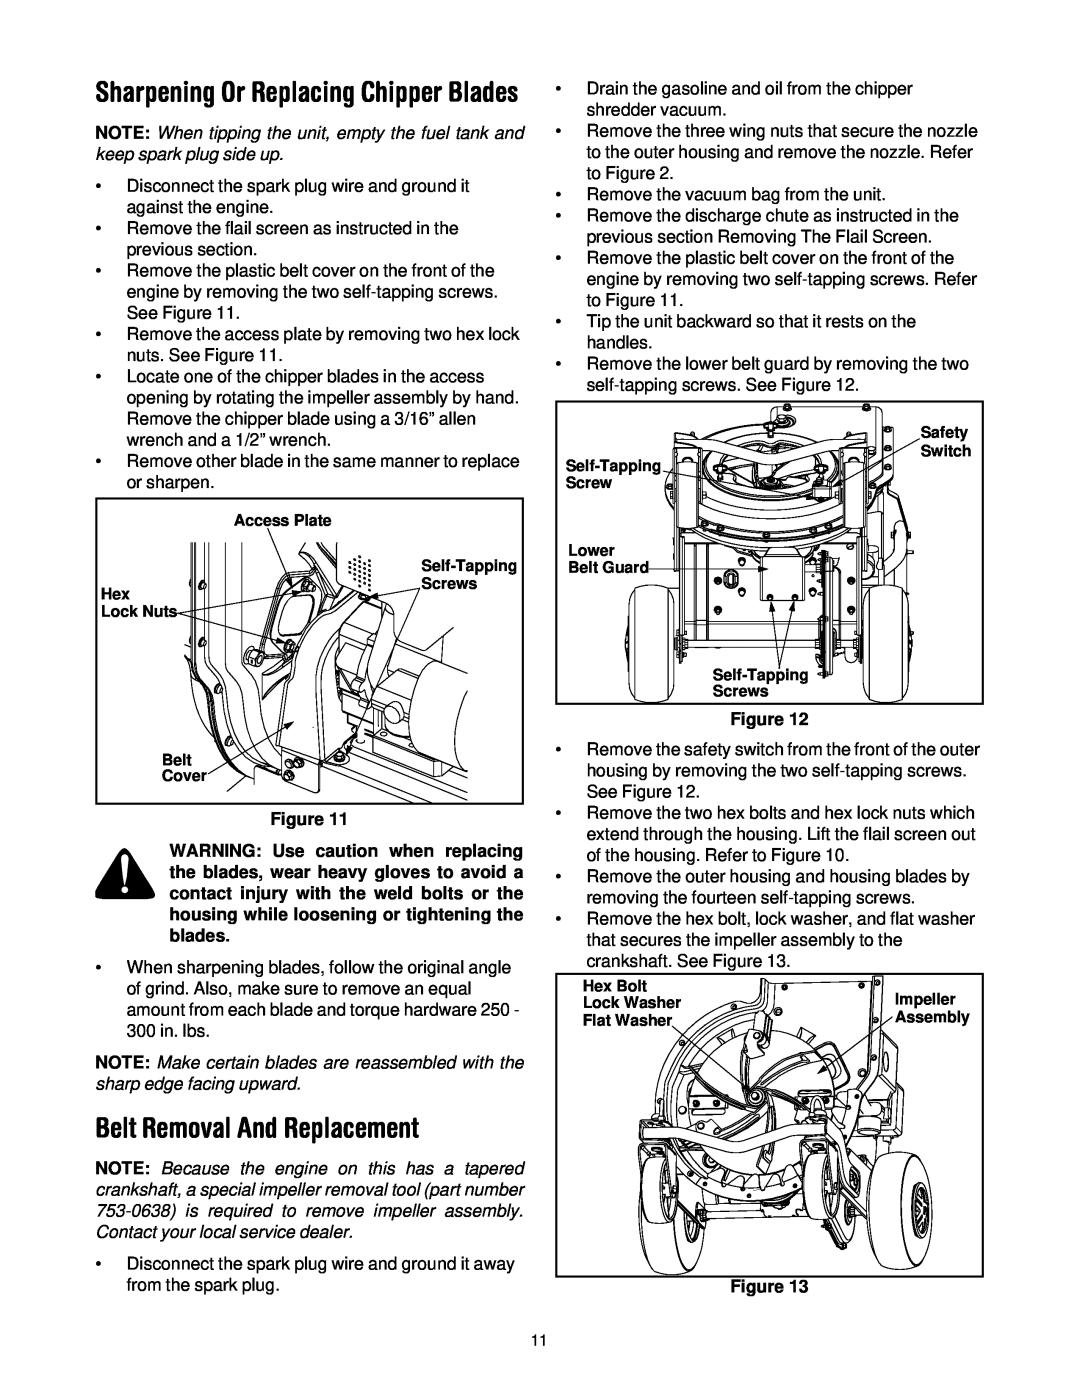 Yard-Man 203 manual Belt Removal And Replacement, Sharpening Or Replacing Chipper Blades 